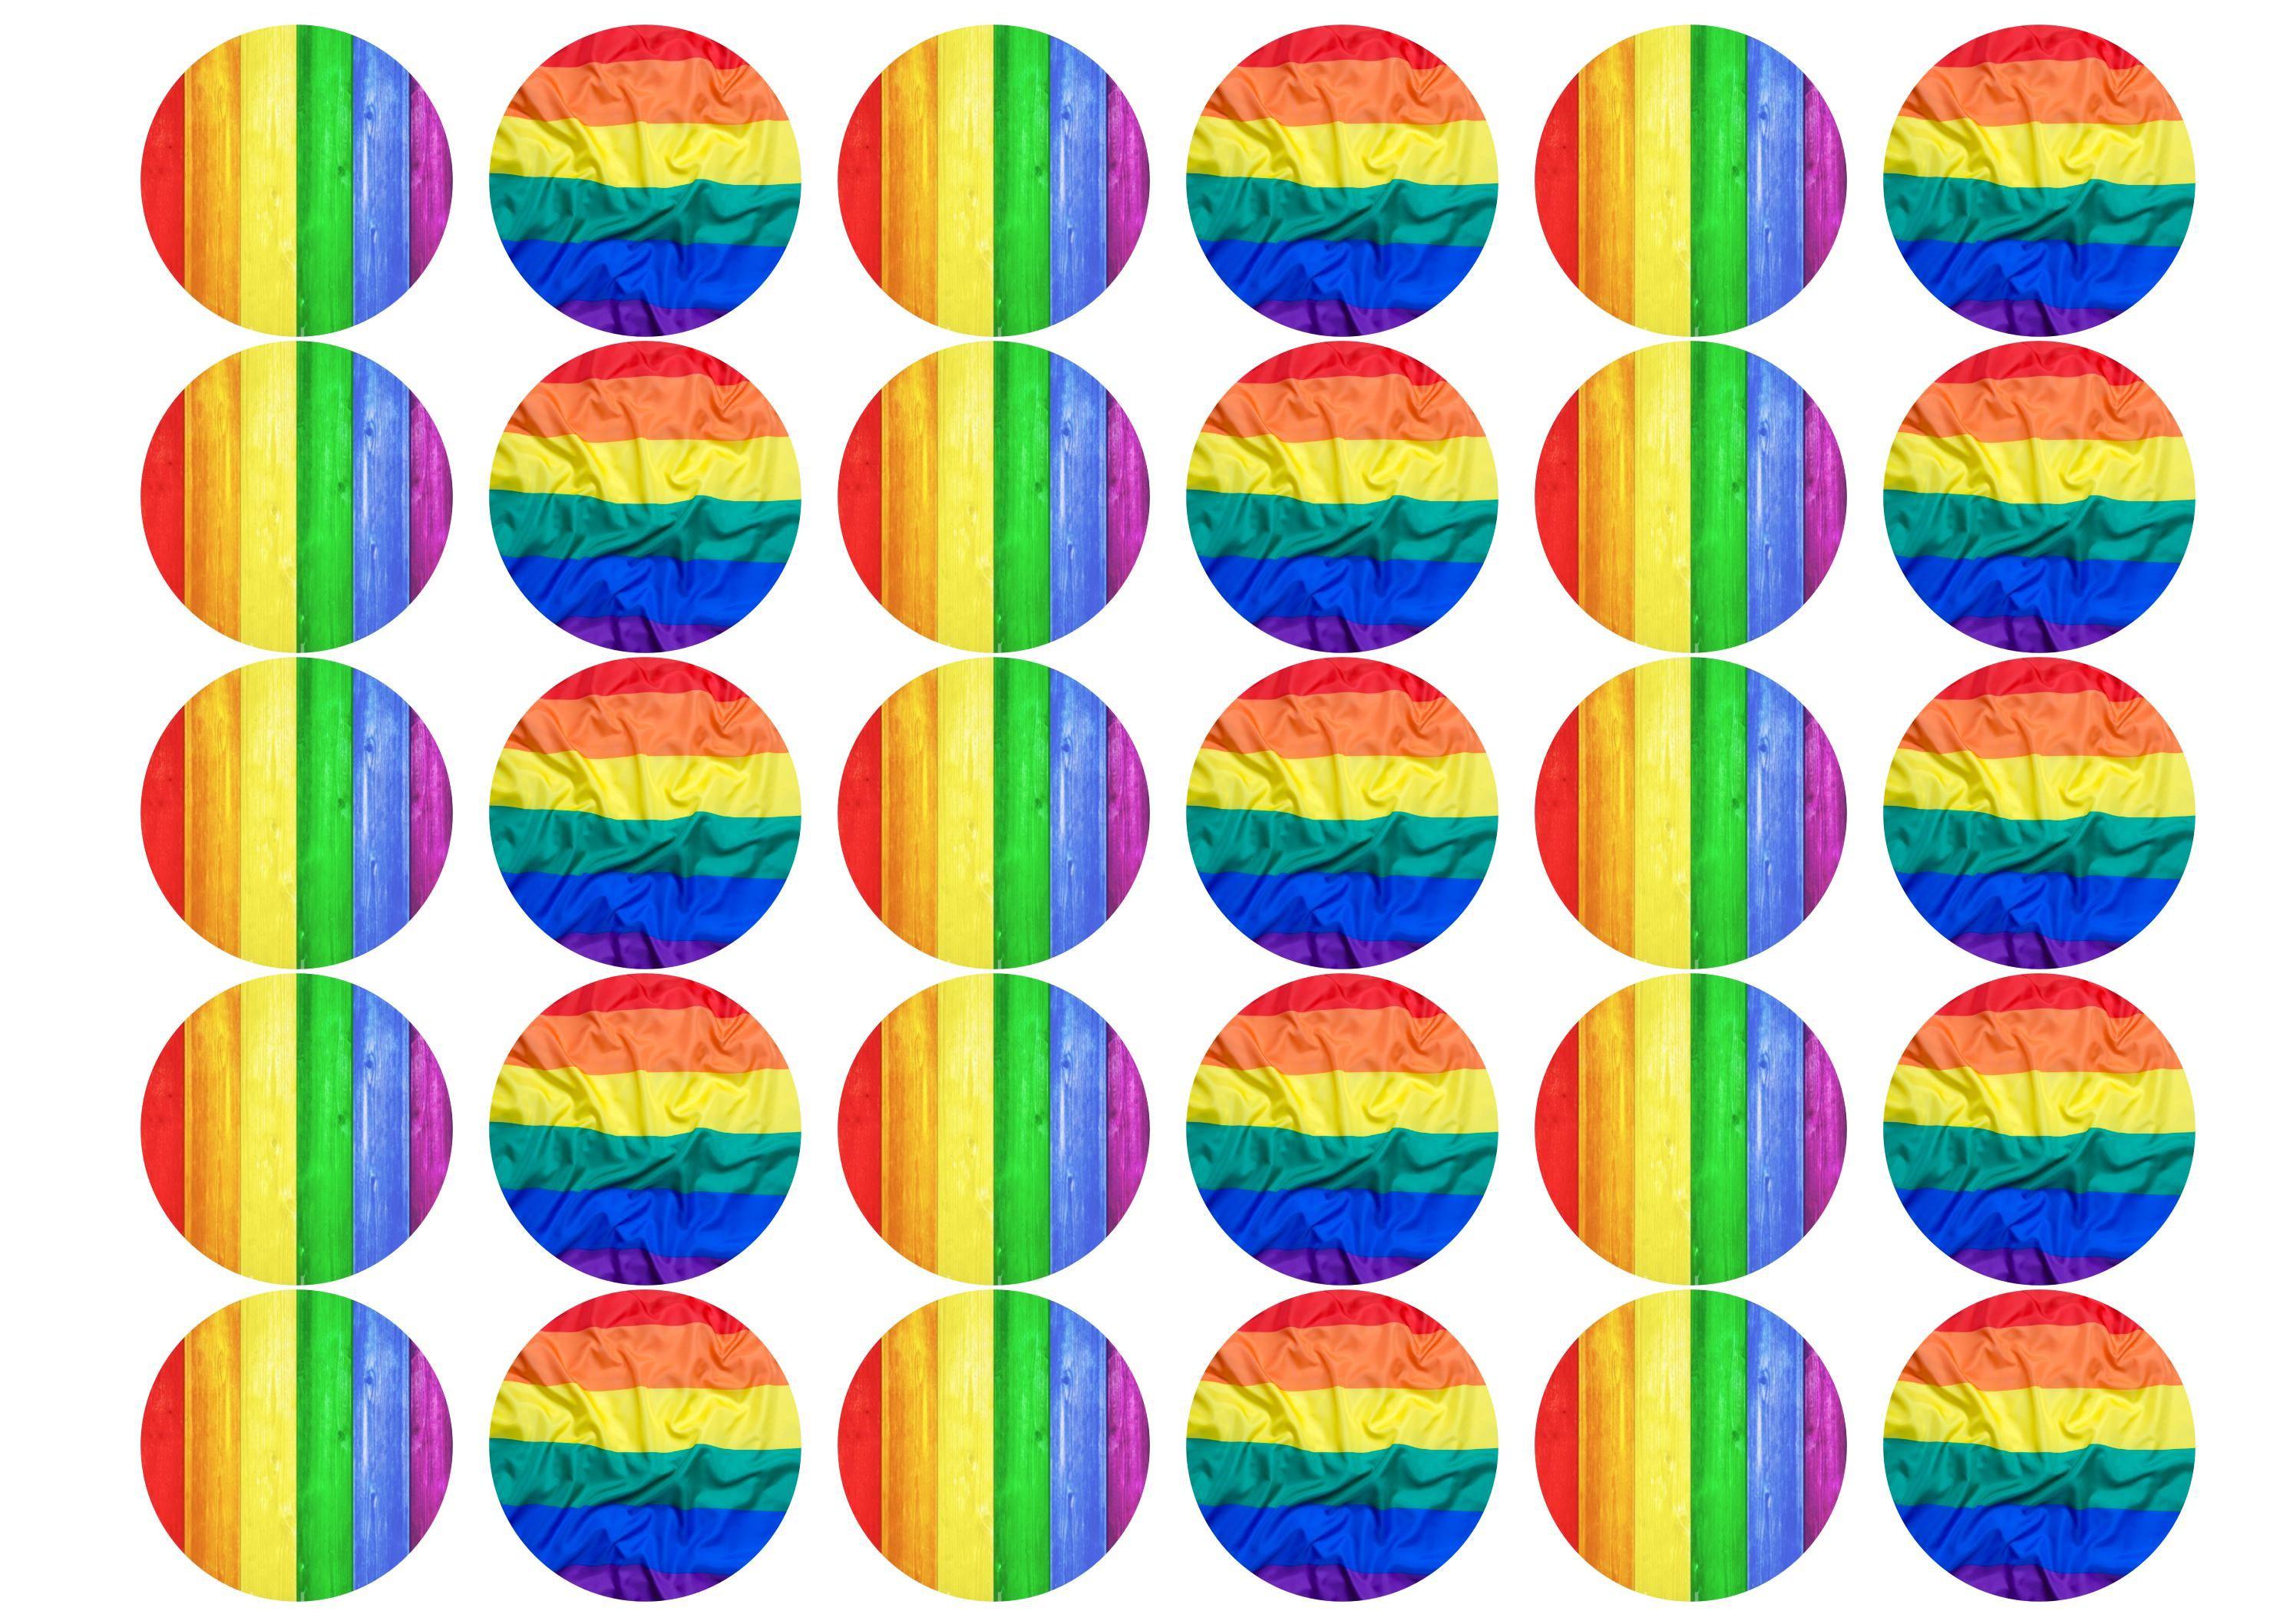 30 edible cupcake toppers with images of the Pride Rainbow